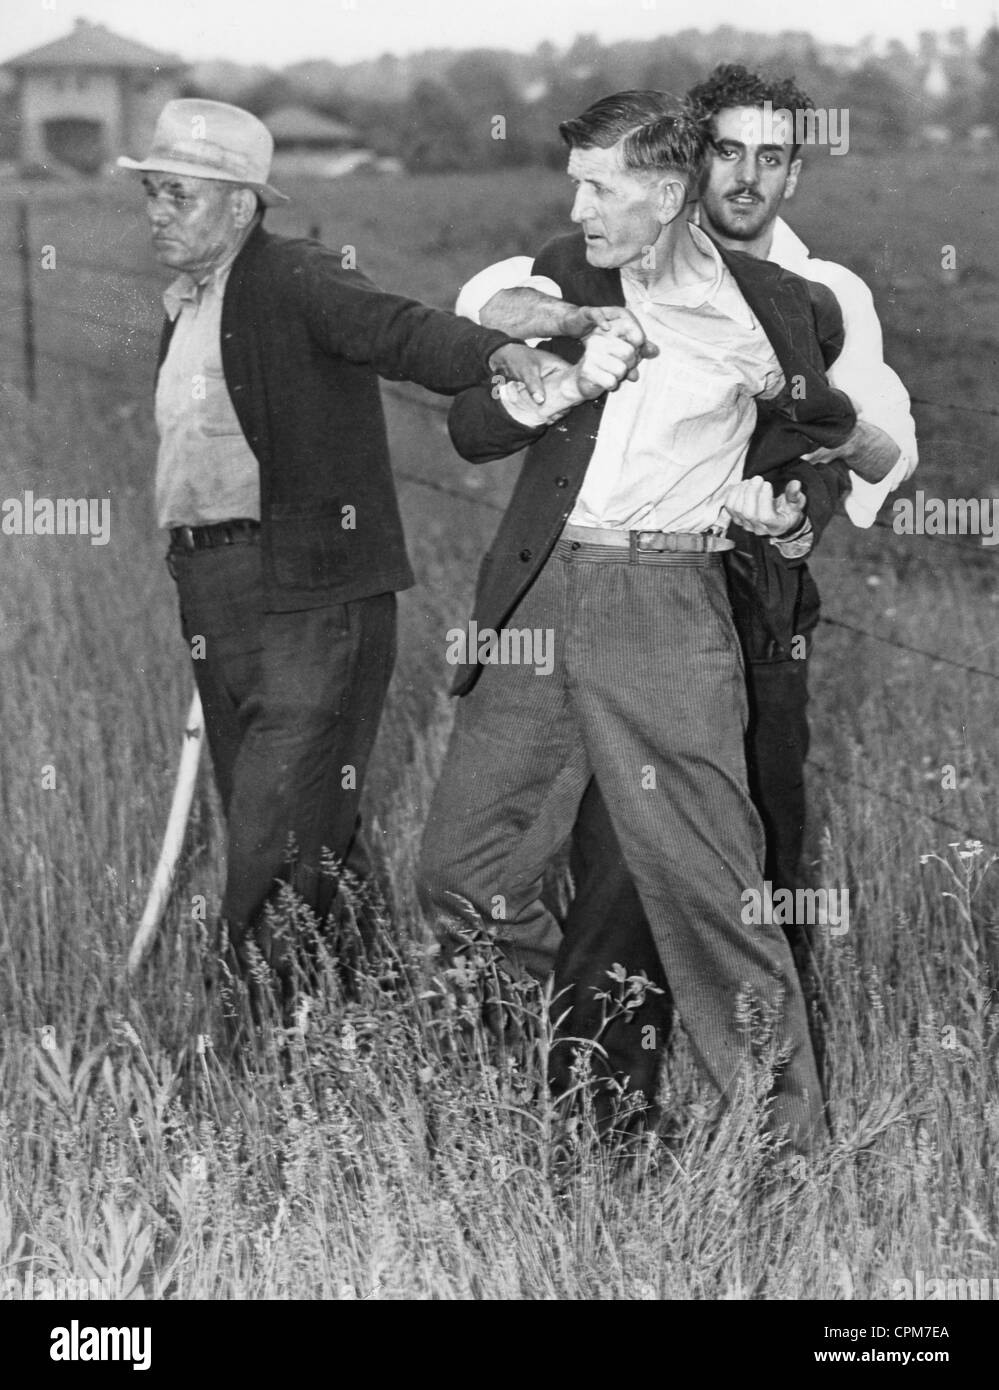 Owner of a farm is resisting the forced sale, 1937 Stock Photo